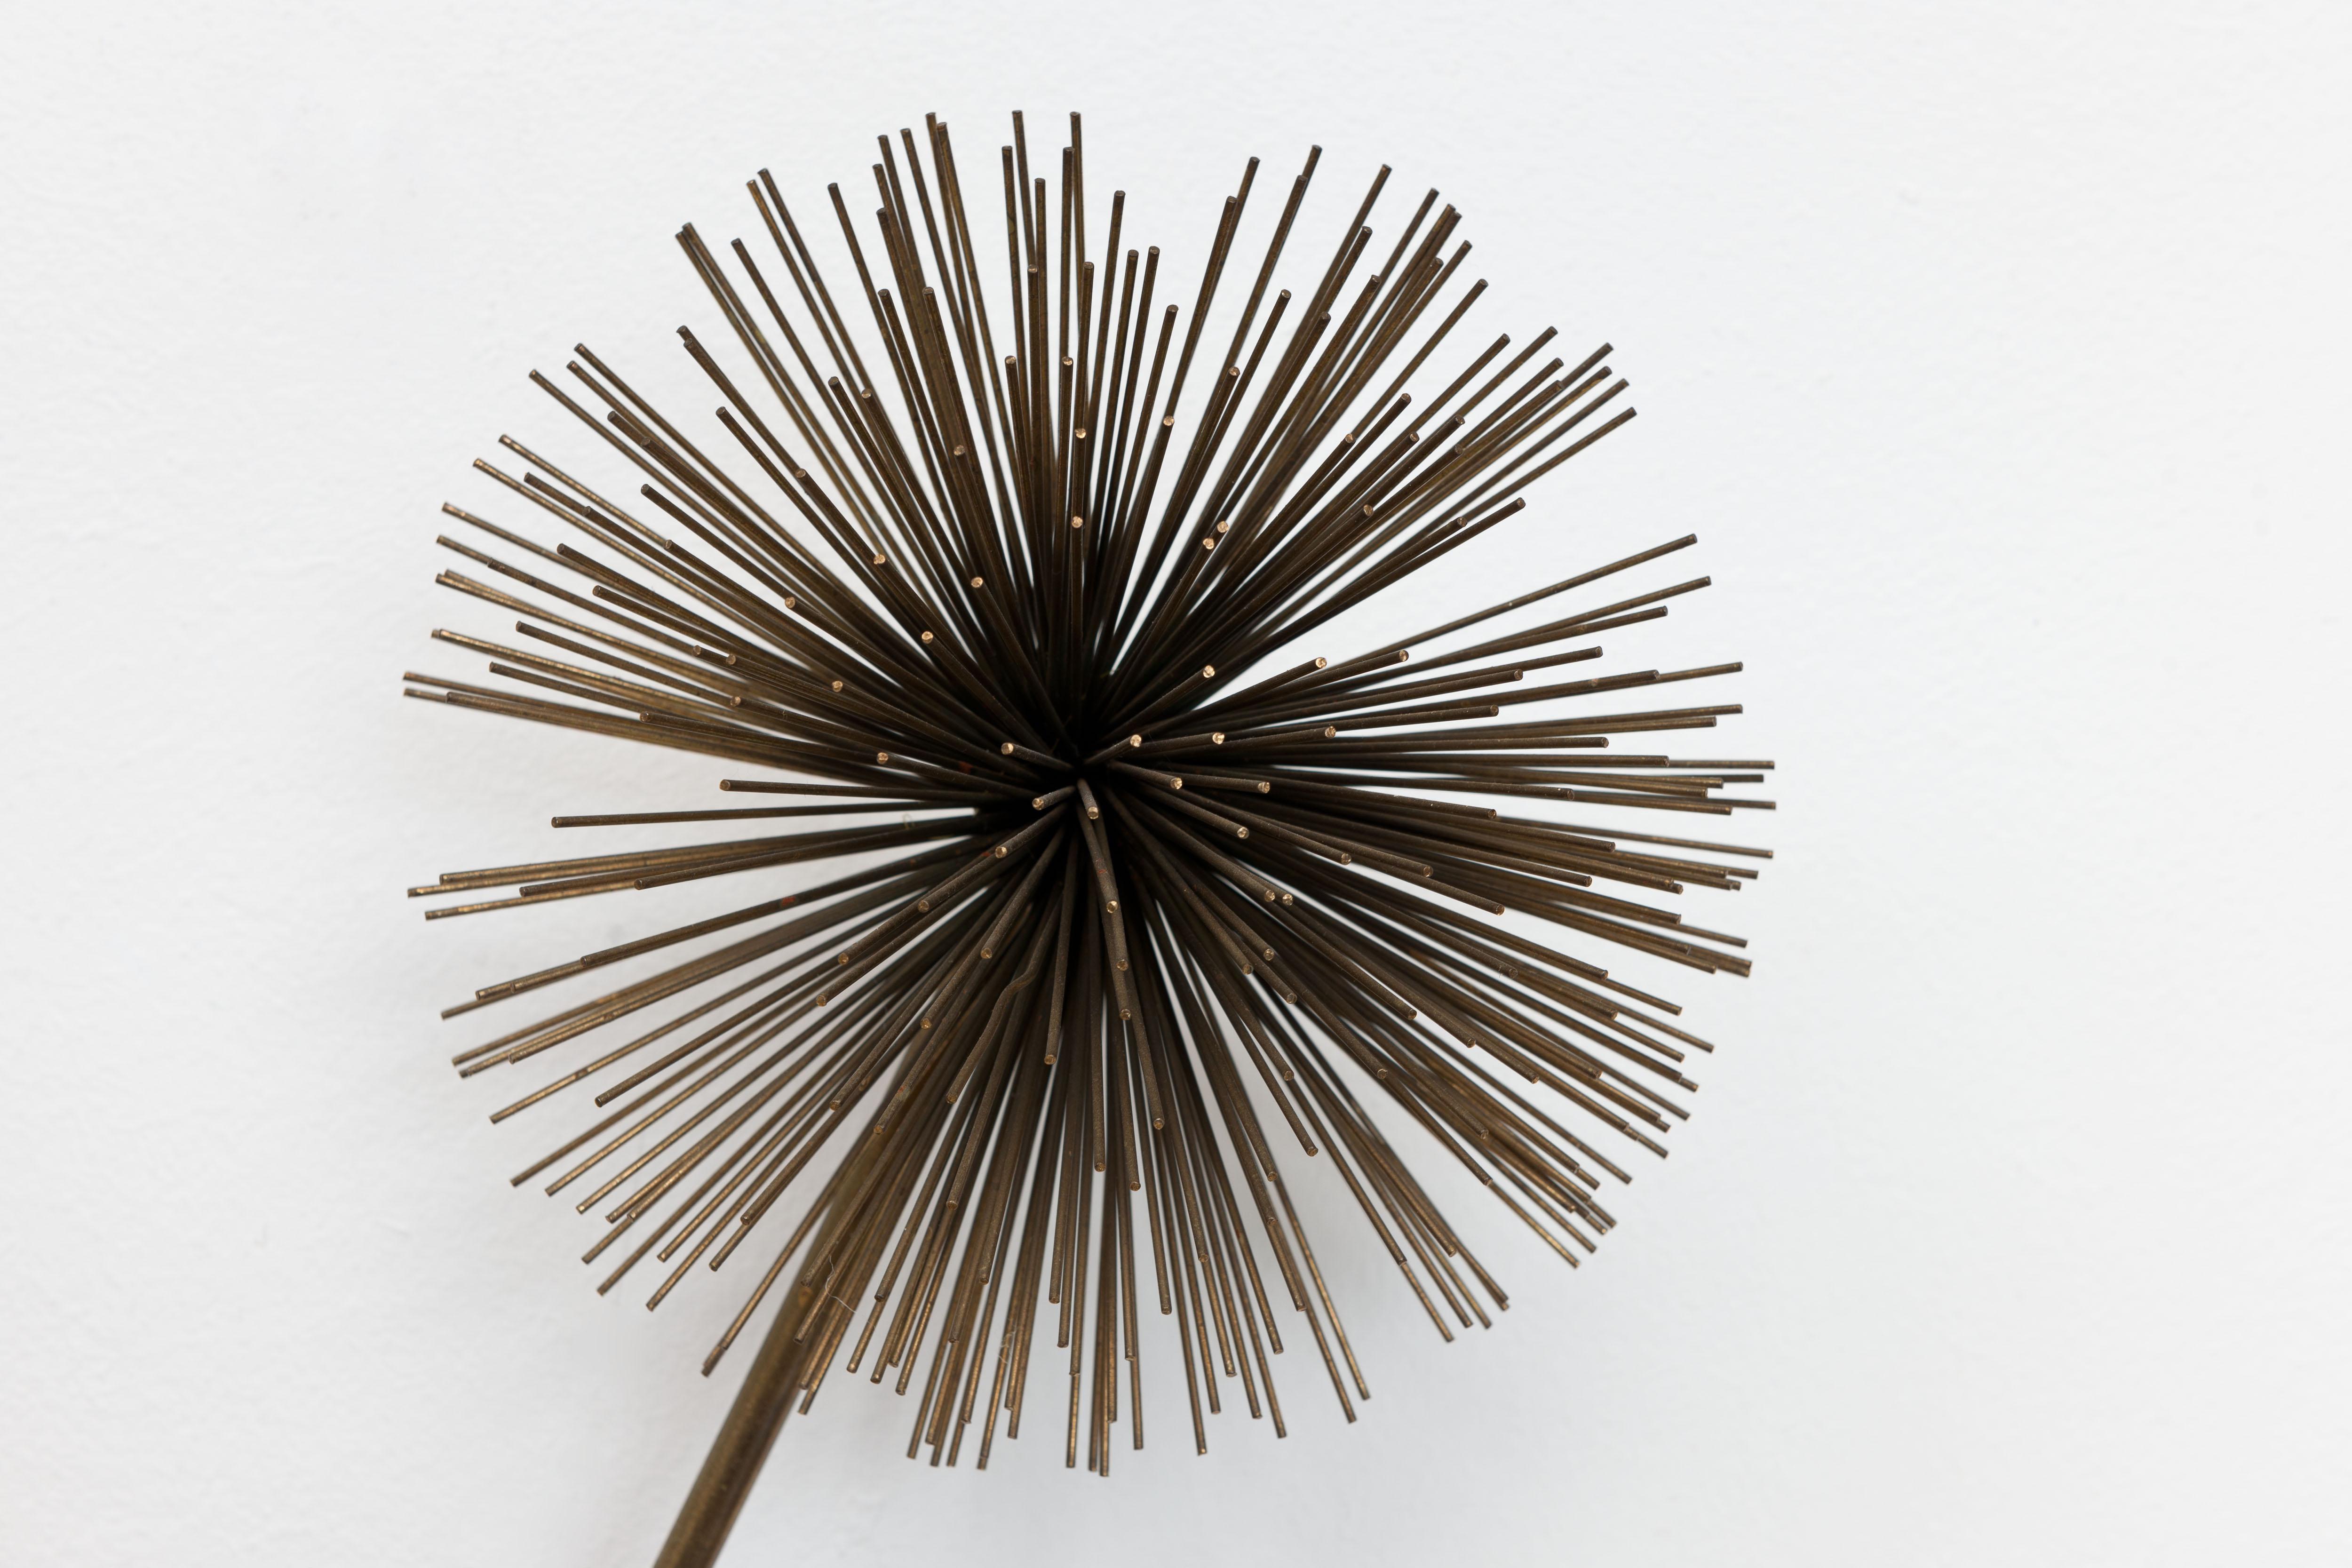 Late 20th Century Brass Curtis Jere 'Pom Pom' Wall Sculpture, Signed C. Jere, 1979